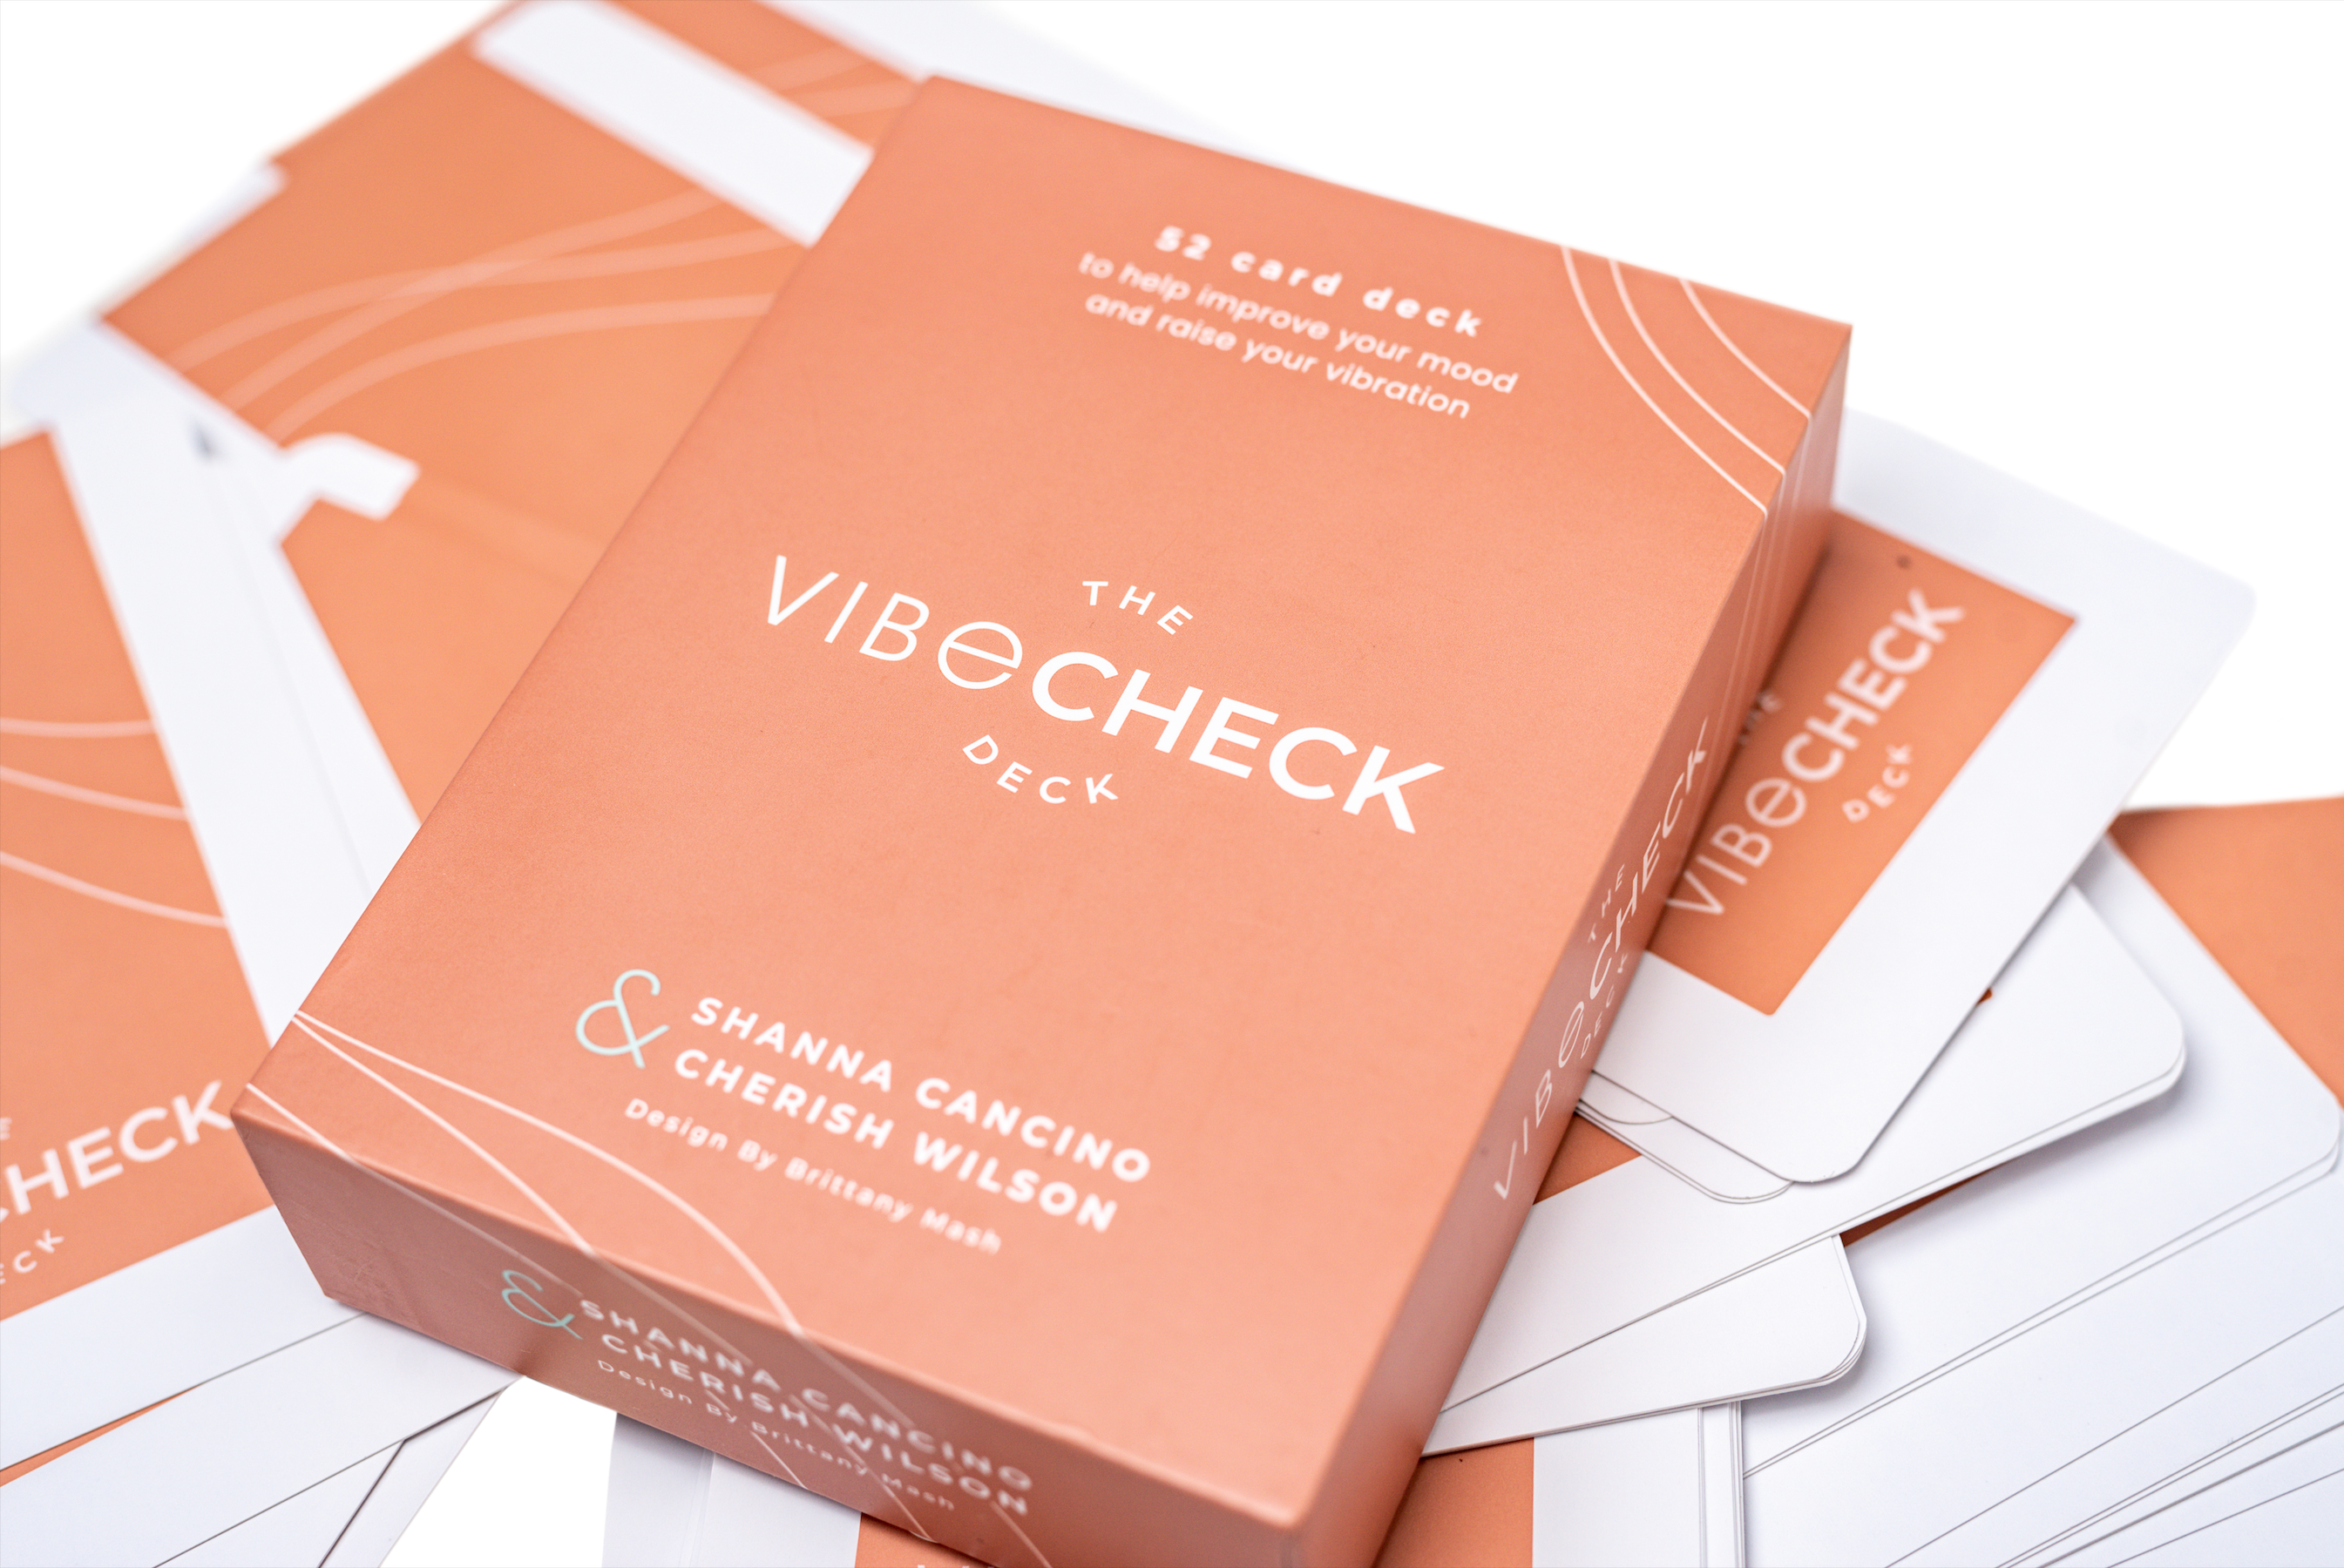 The Vibe Check Deck